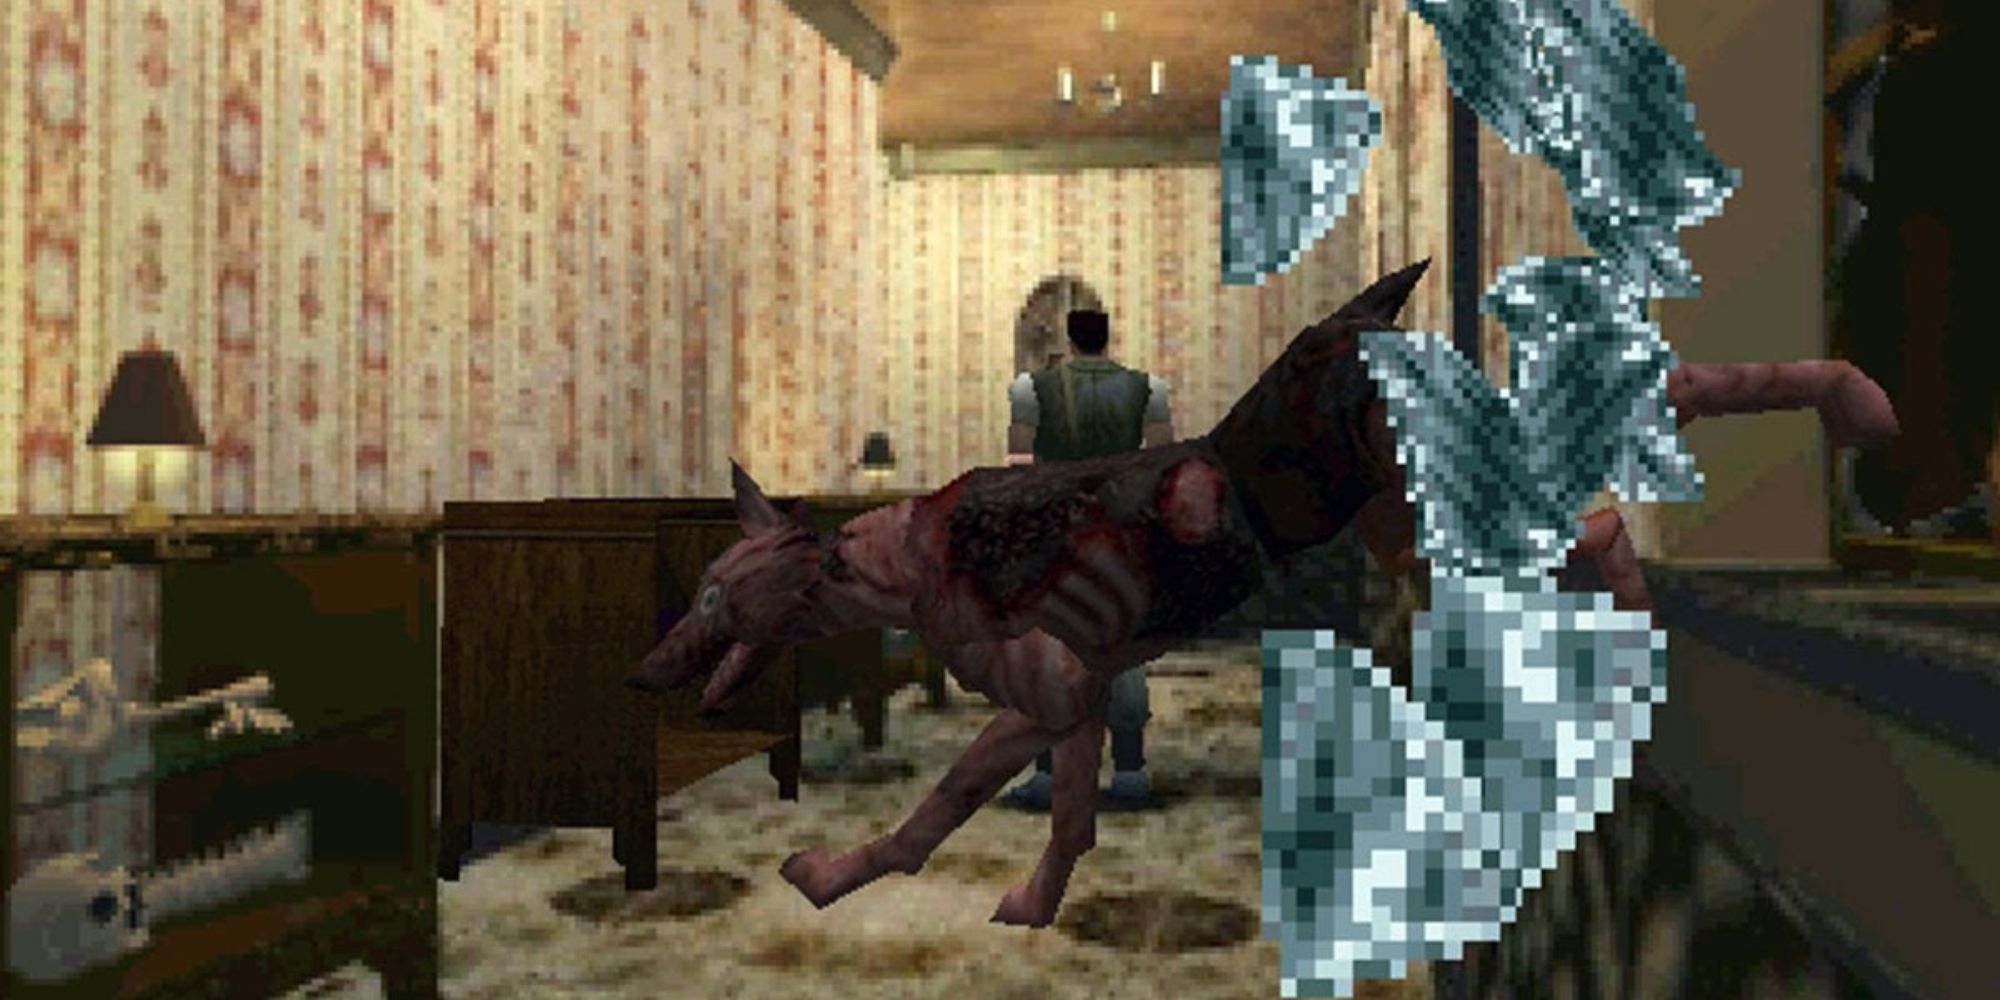 A dog bursts through a window in Resident Evil 1